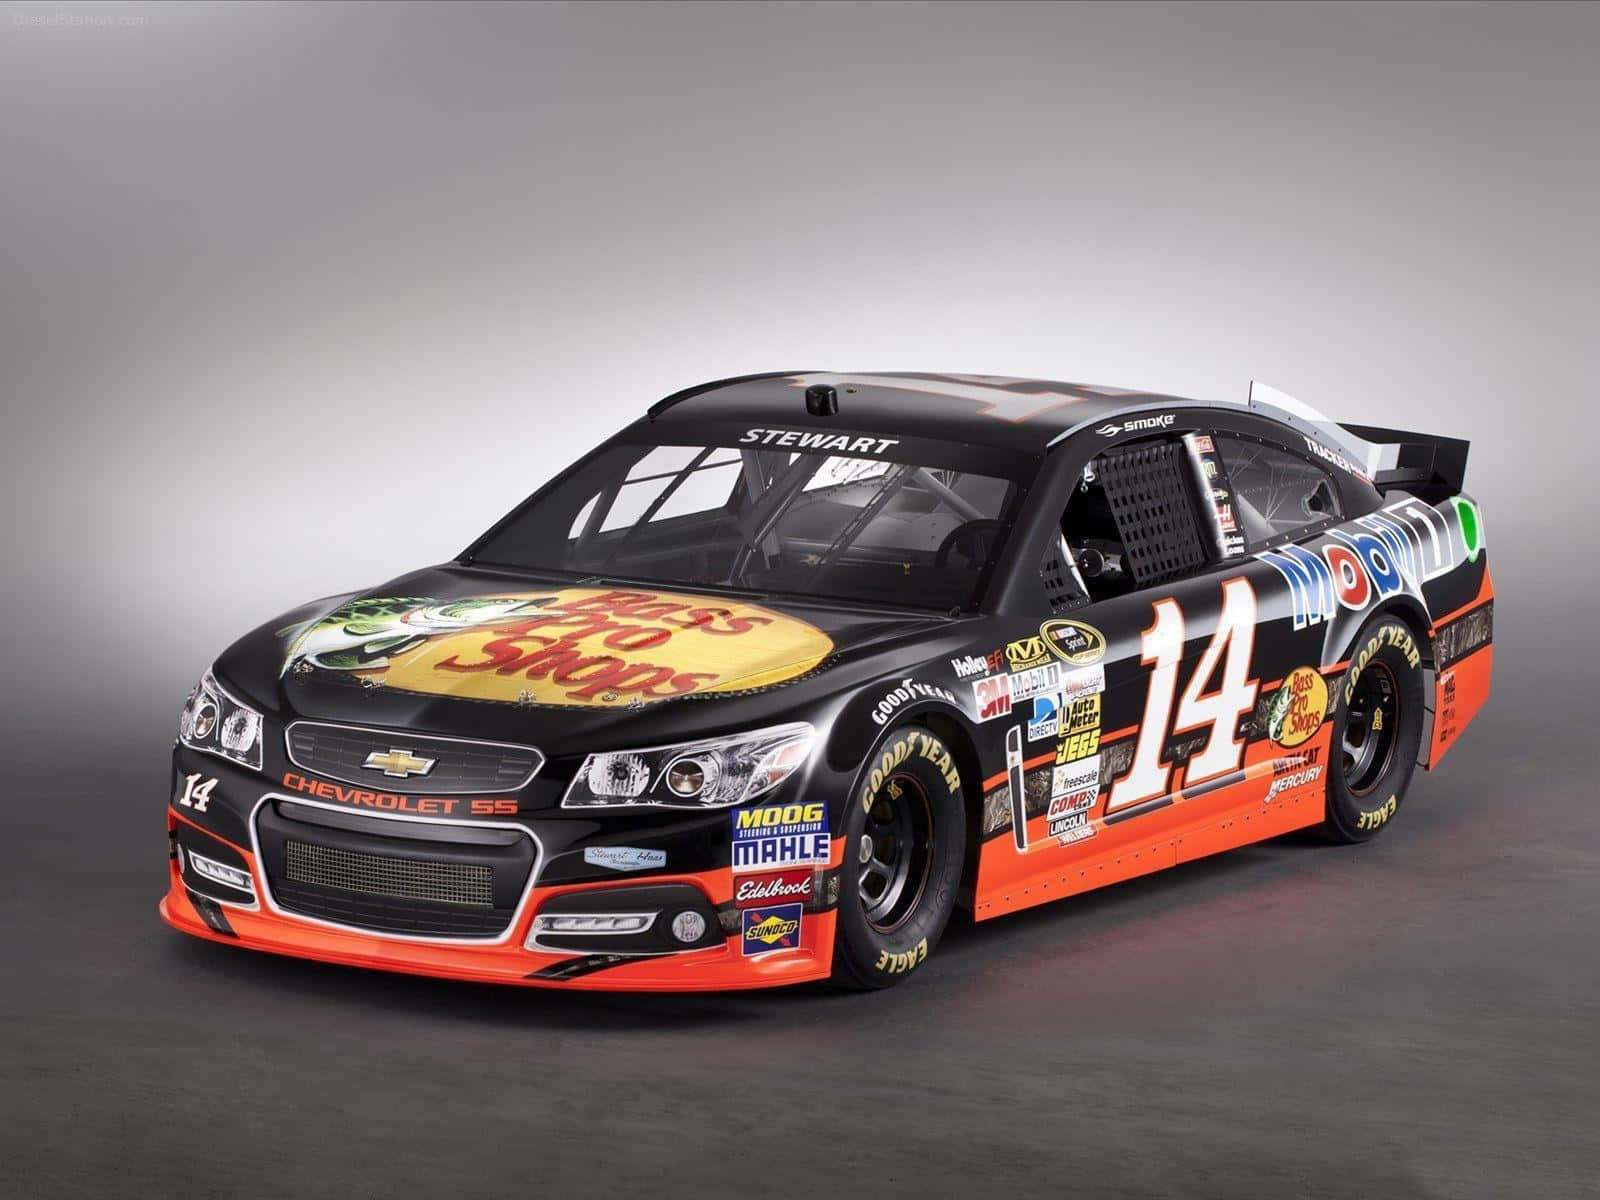 A Nascar Car With The Number 12 On It